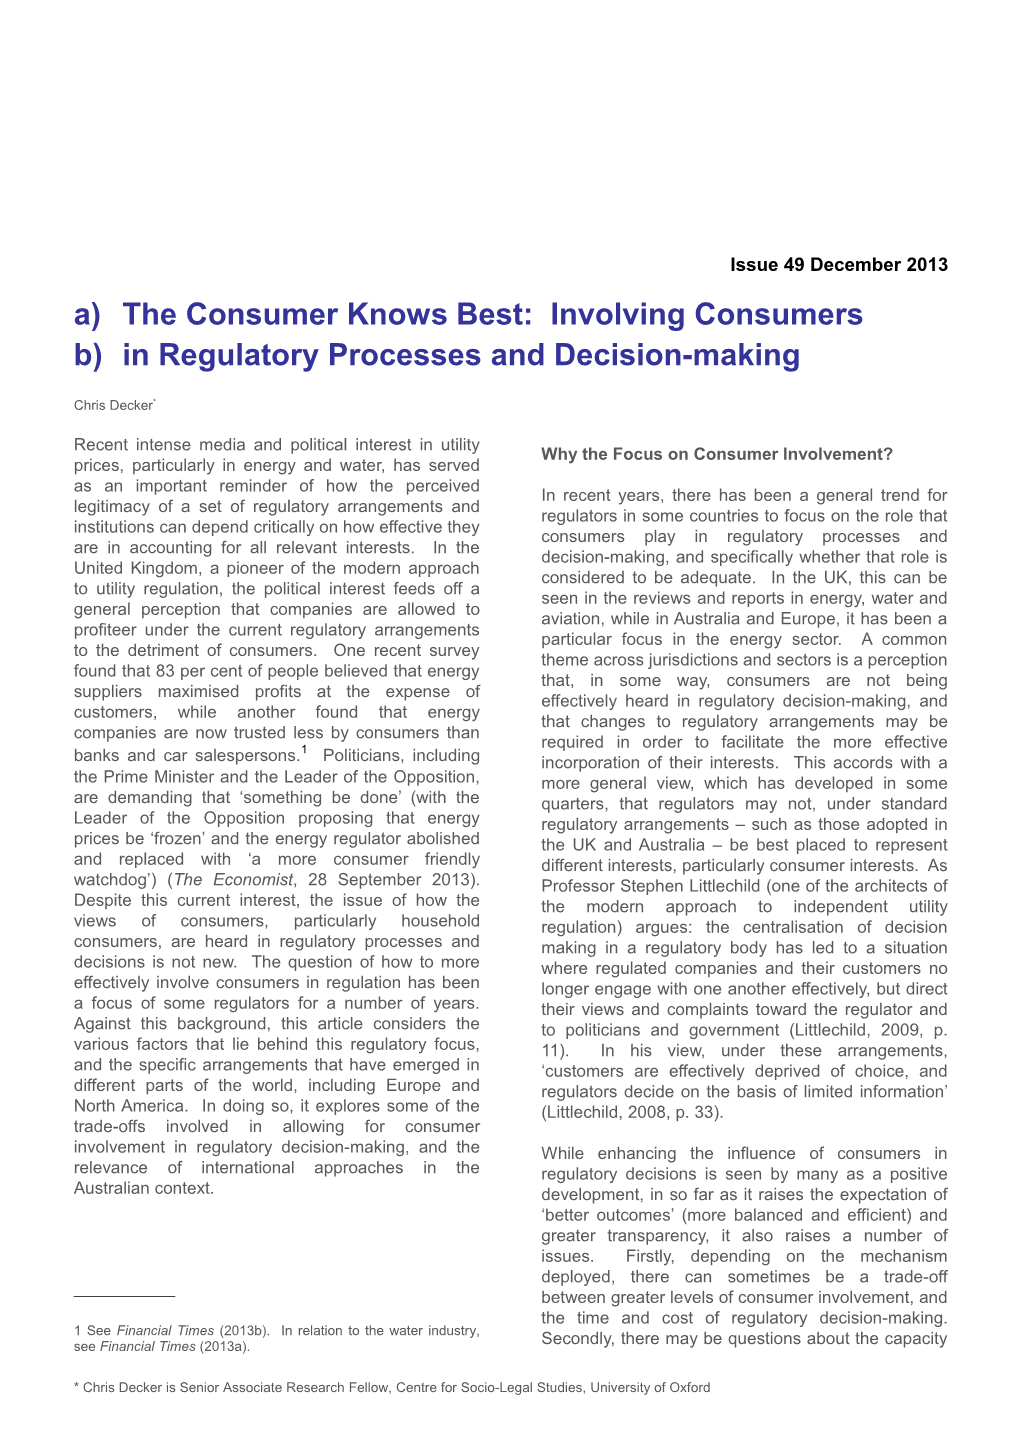 The Consumer Knows Best: Involving Consumers